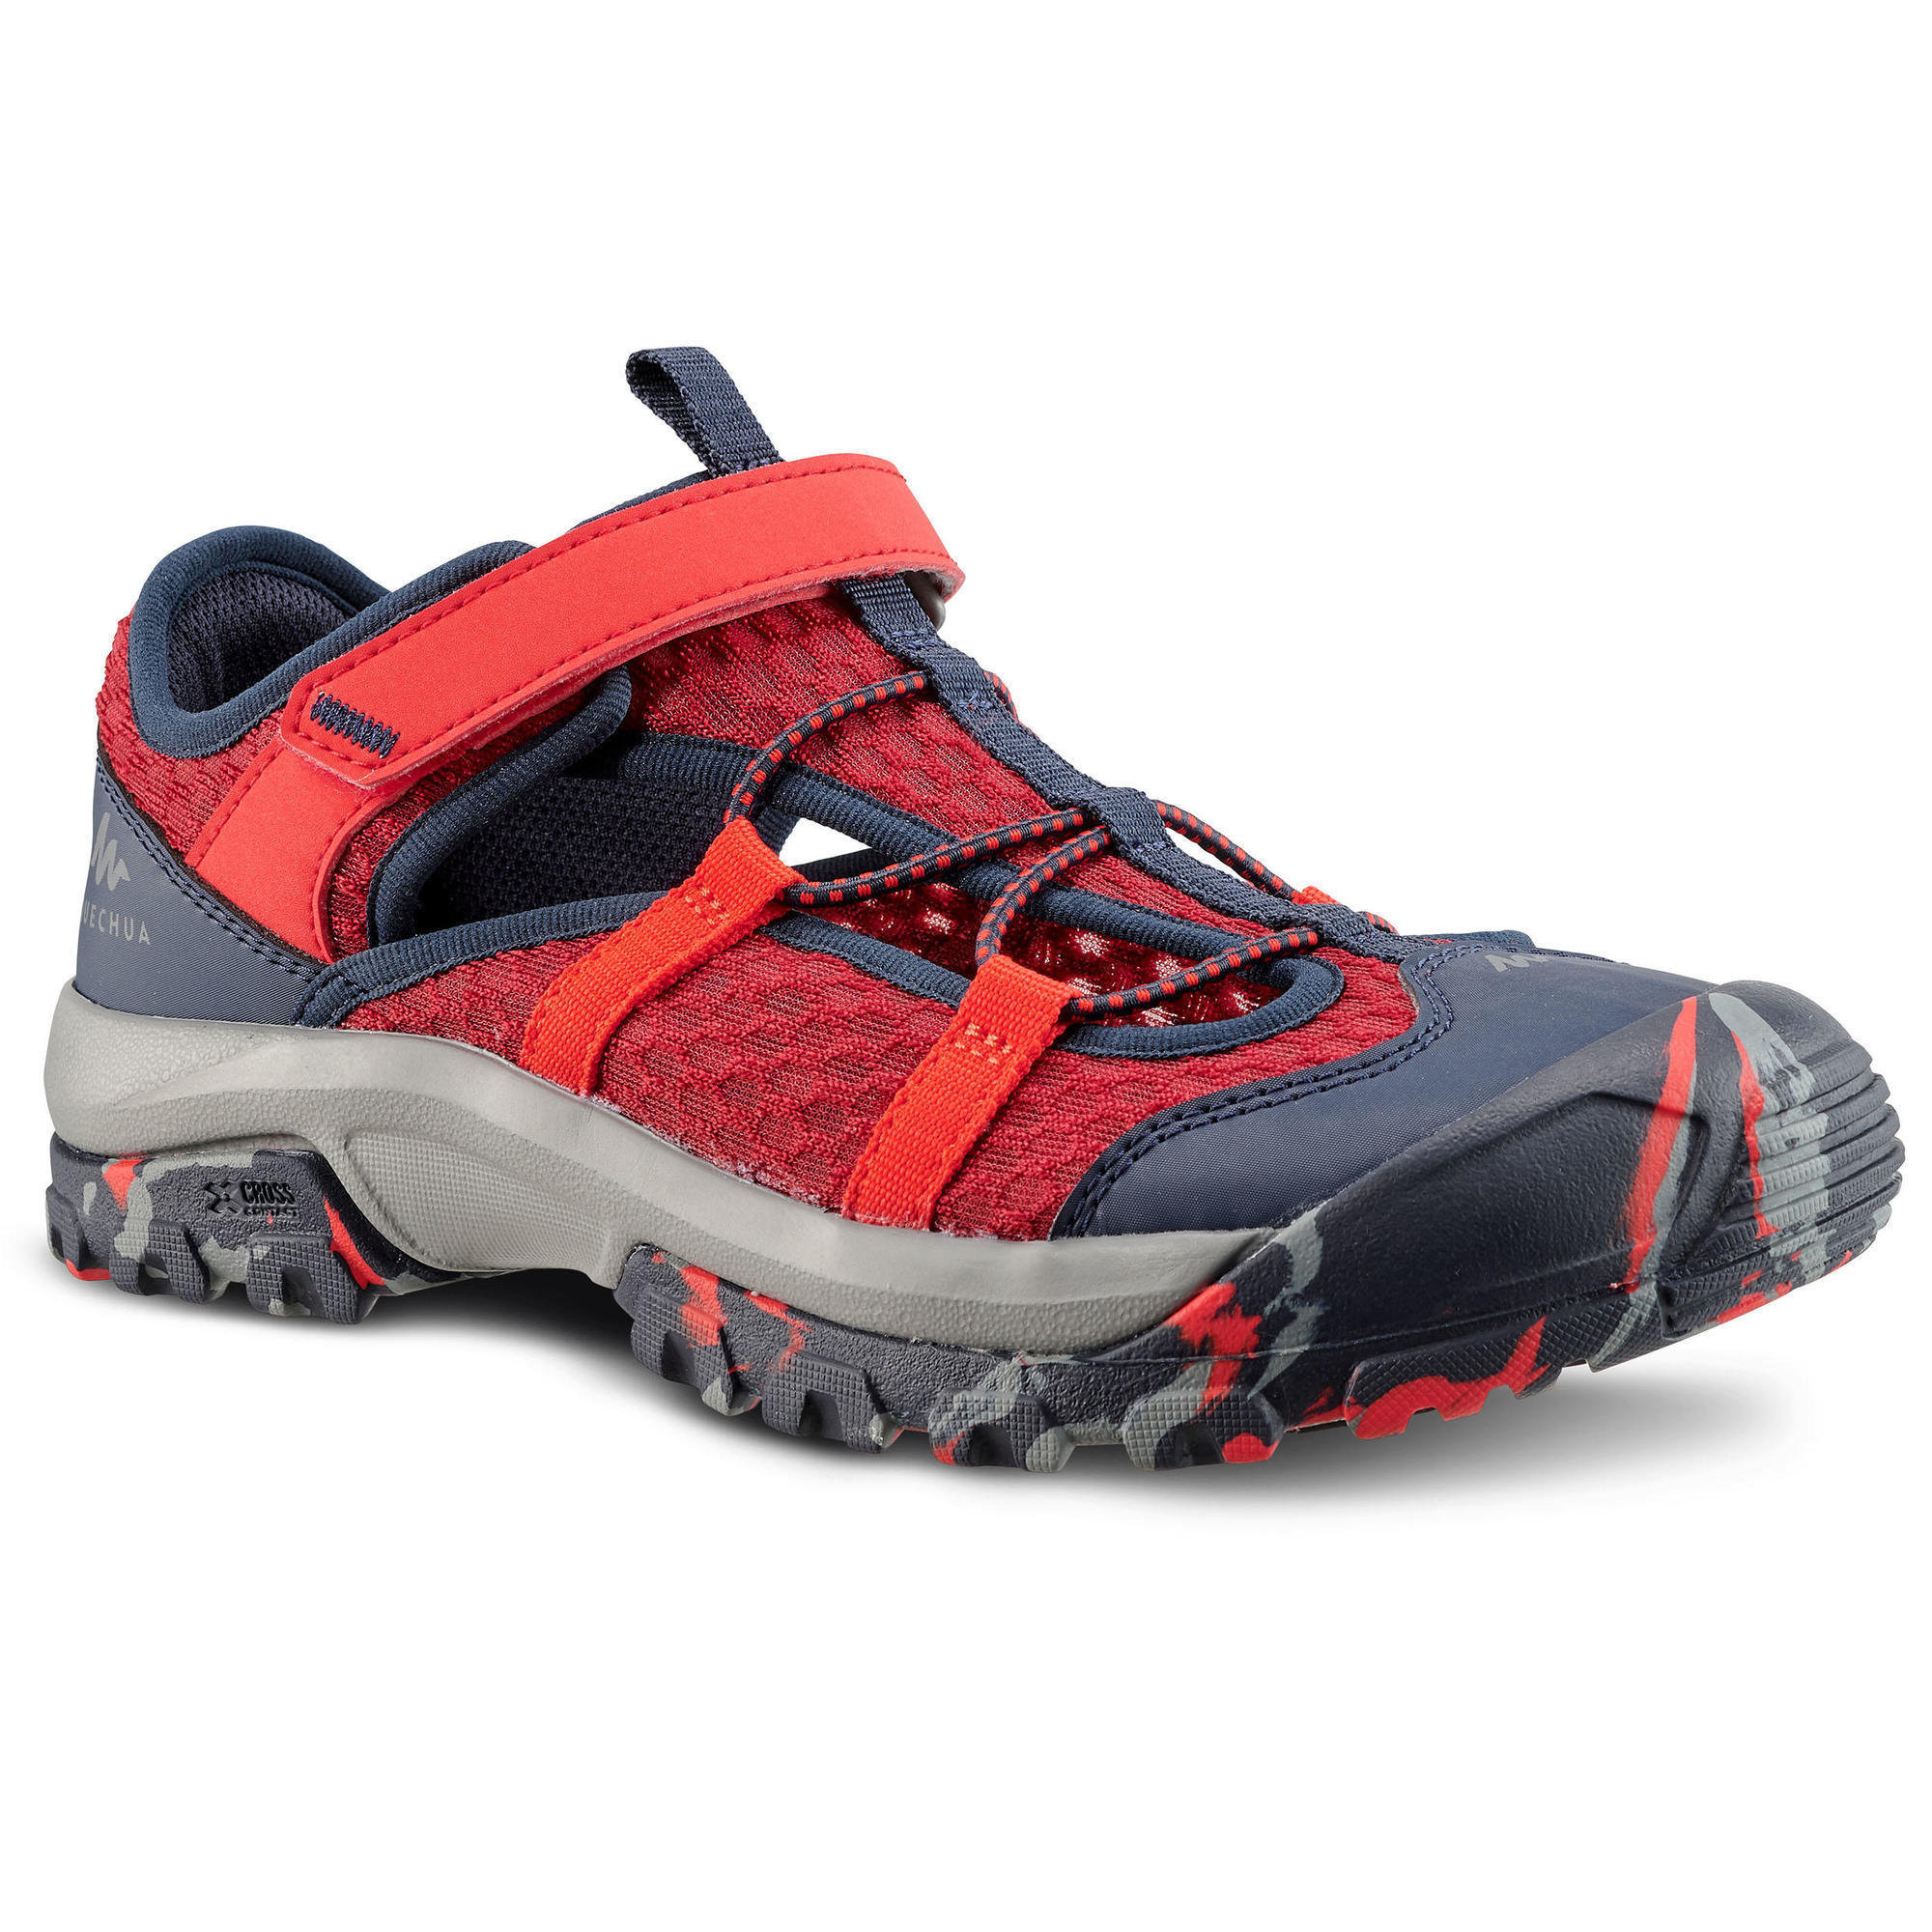 Kids' Hiking Sandals MH150 TW - 28 TO 